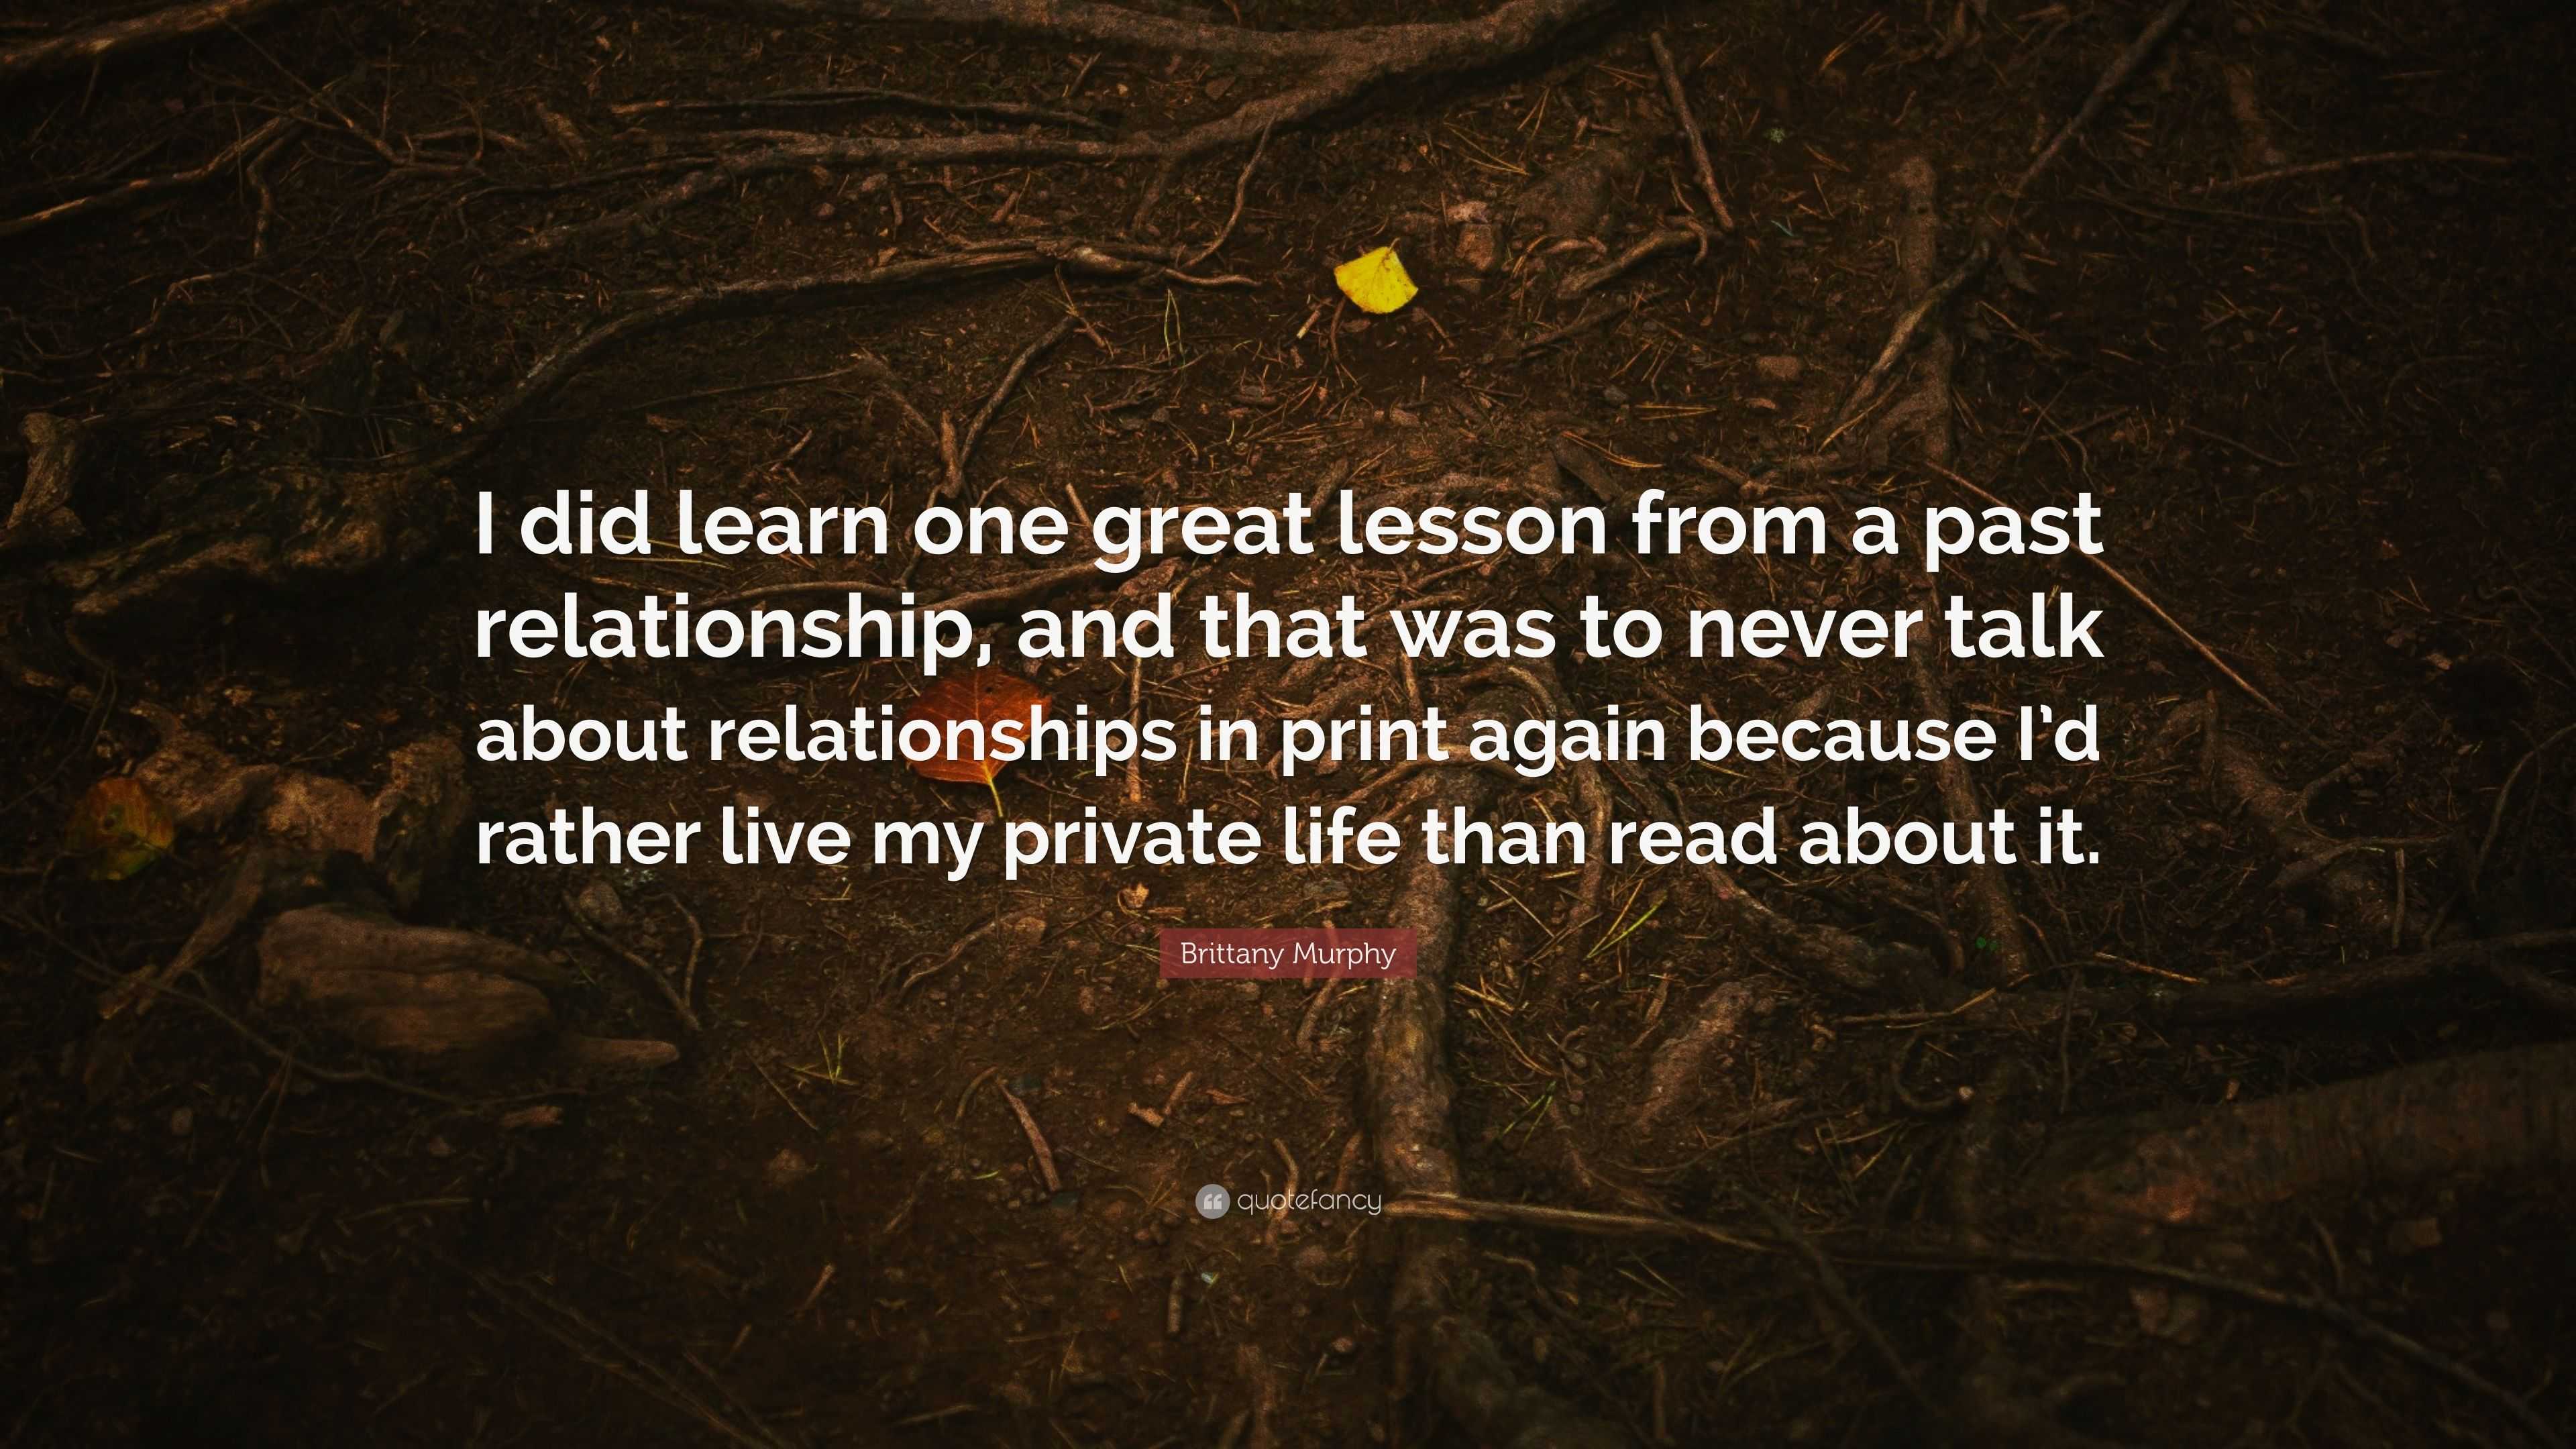 LEARN FROM PAST RELATIONSHIPS QUOTES –